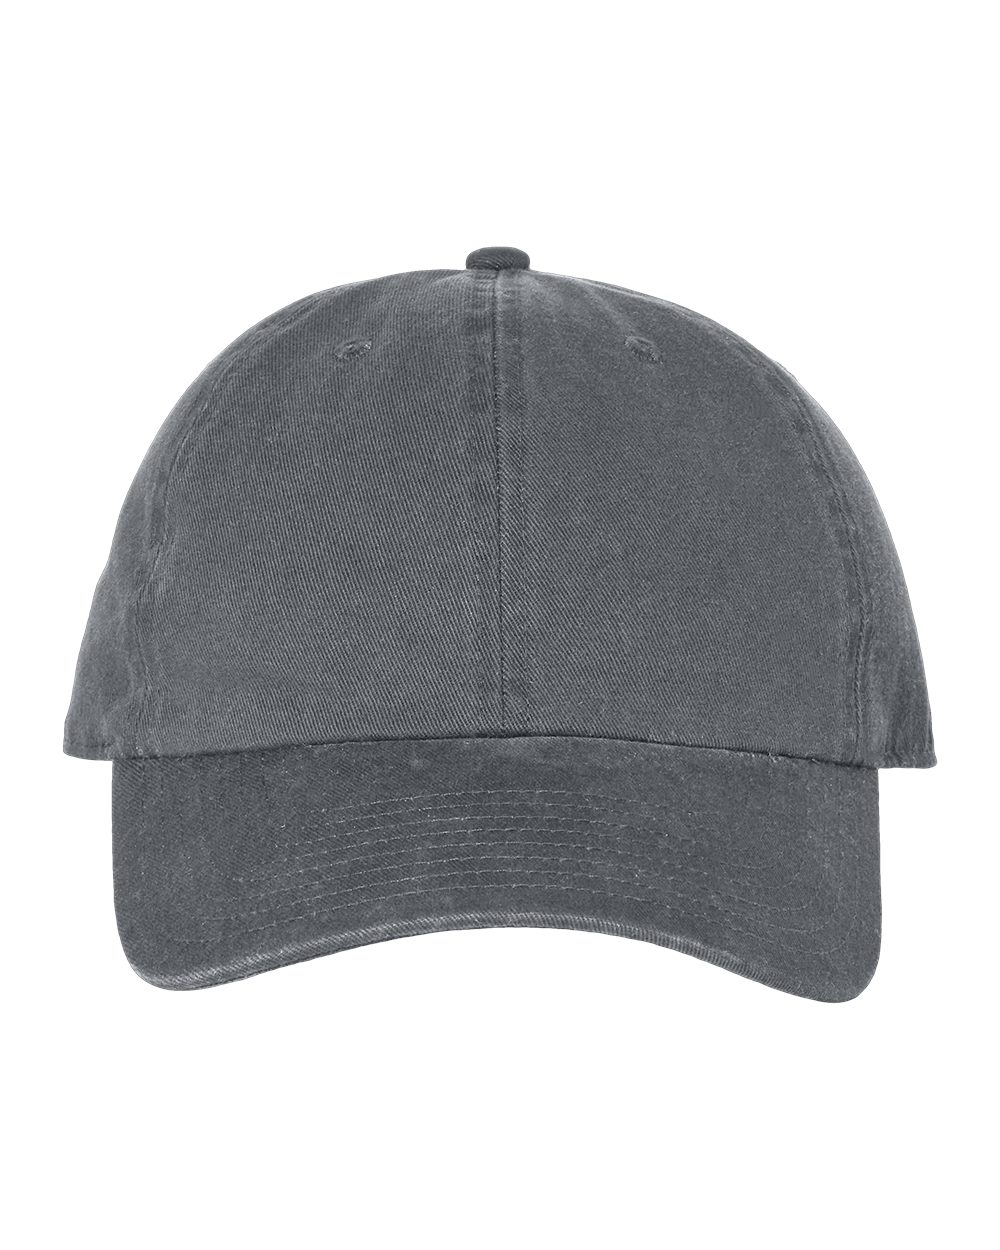 47 Blank Classic Clean Up Cap, Adjustable Plain Baseball Hat for